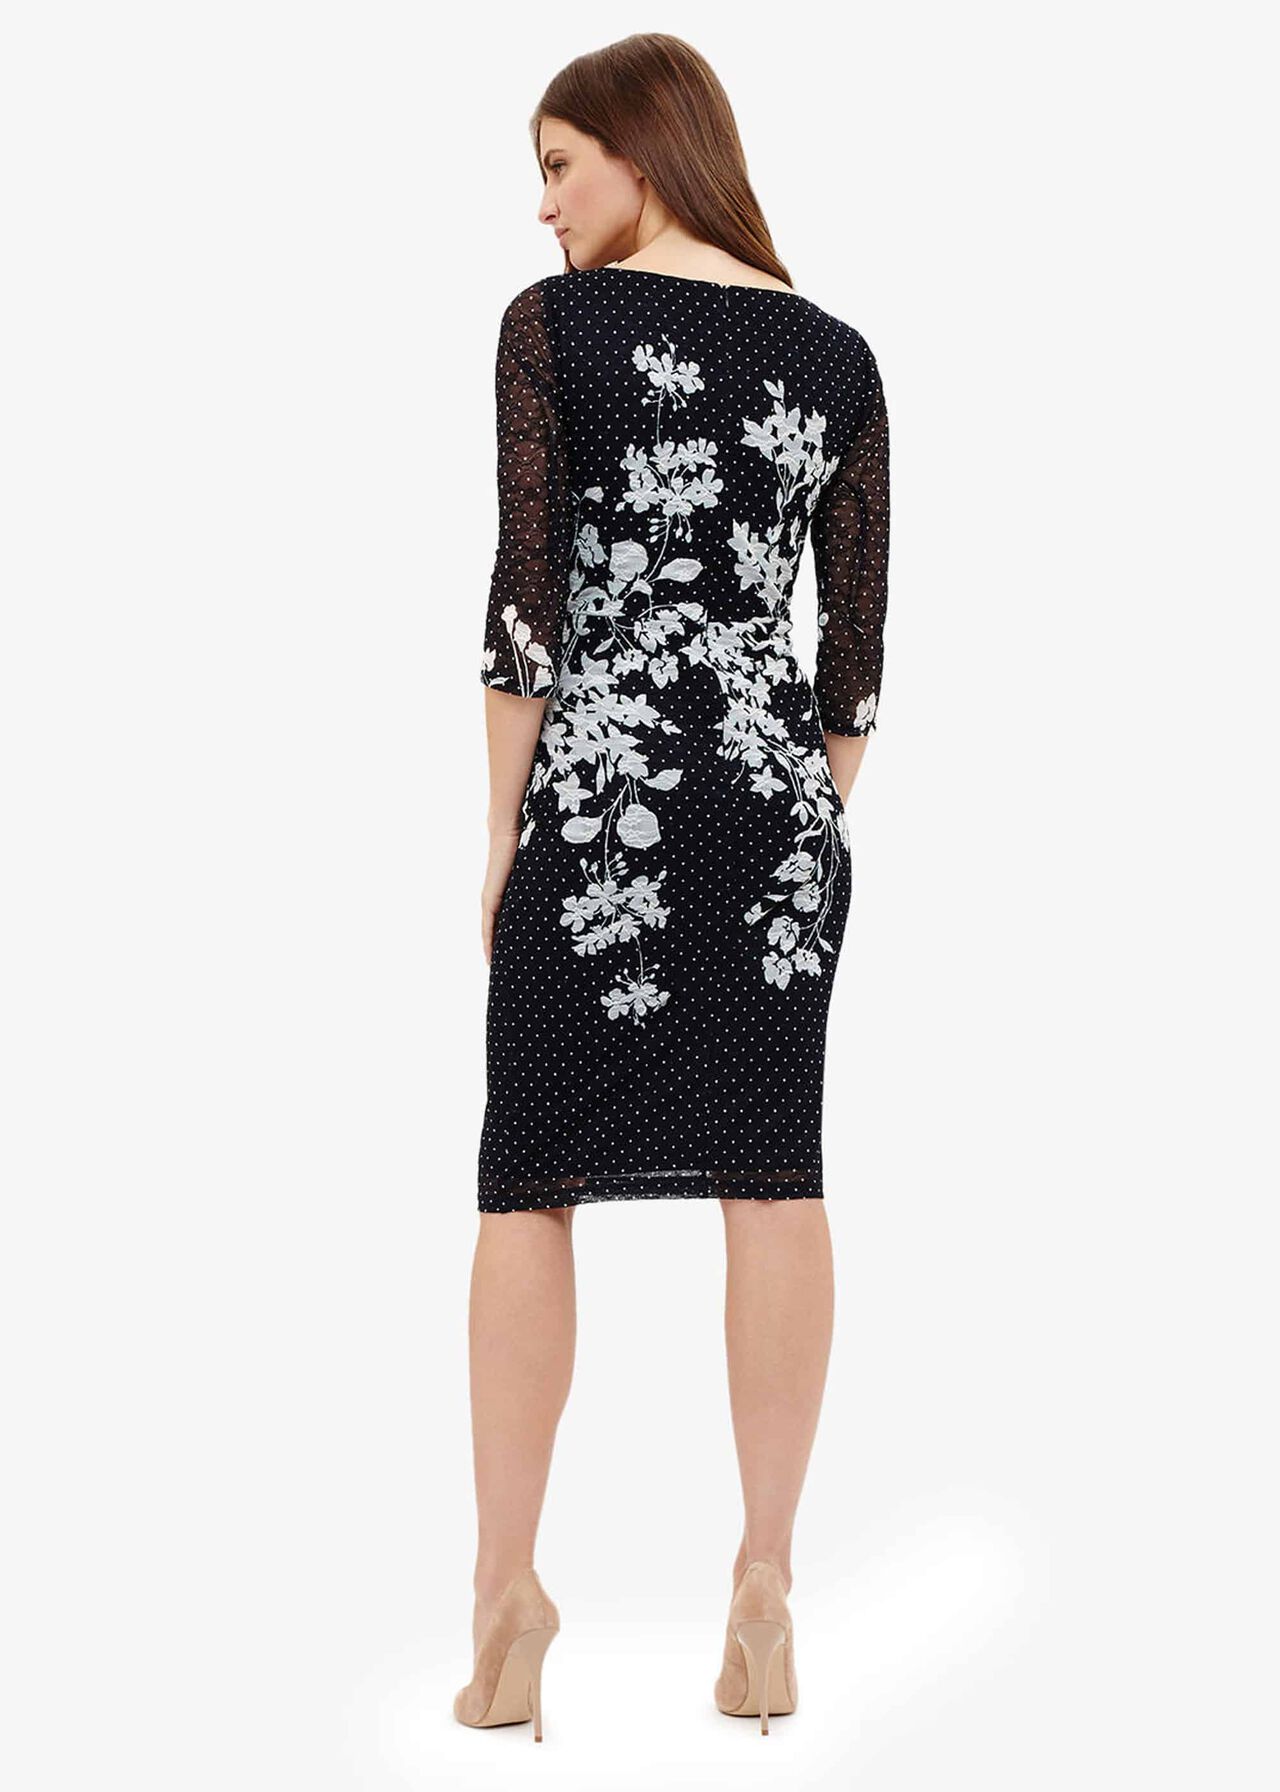 Daisy Floral Lace Dress | Phase Eight